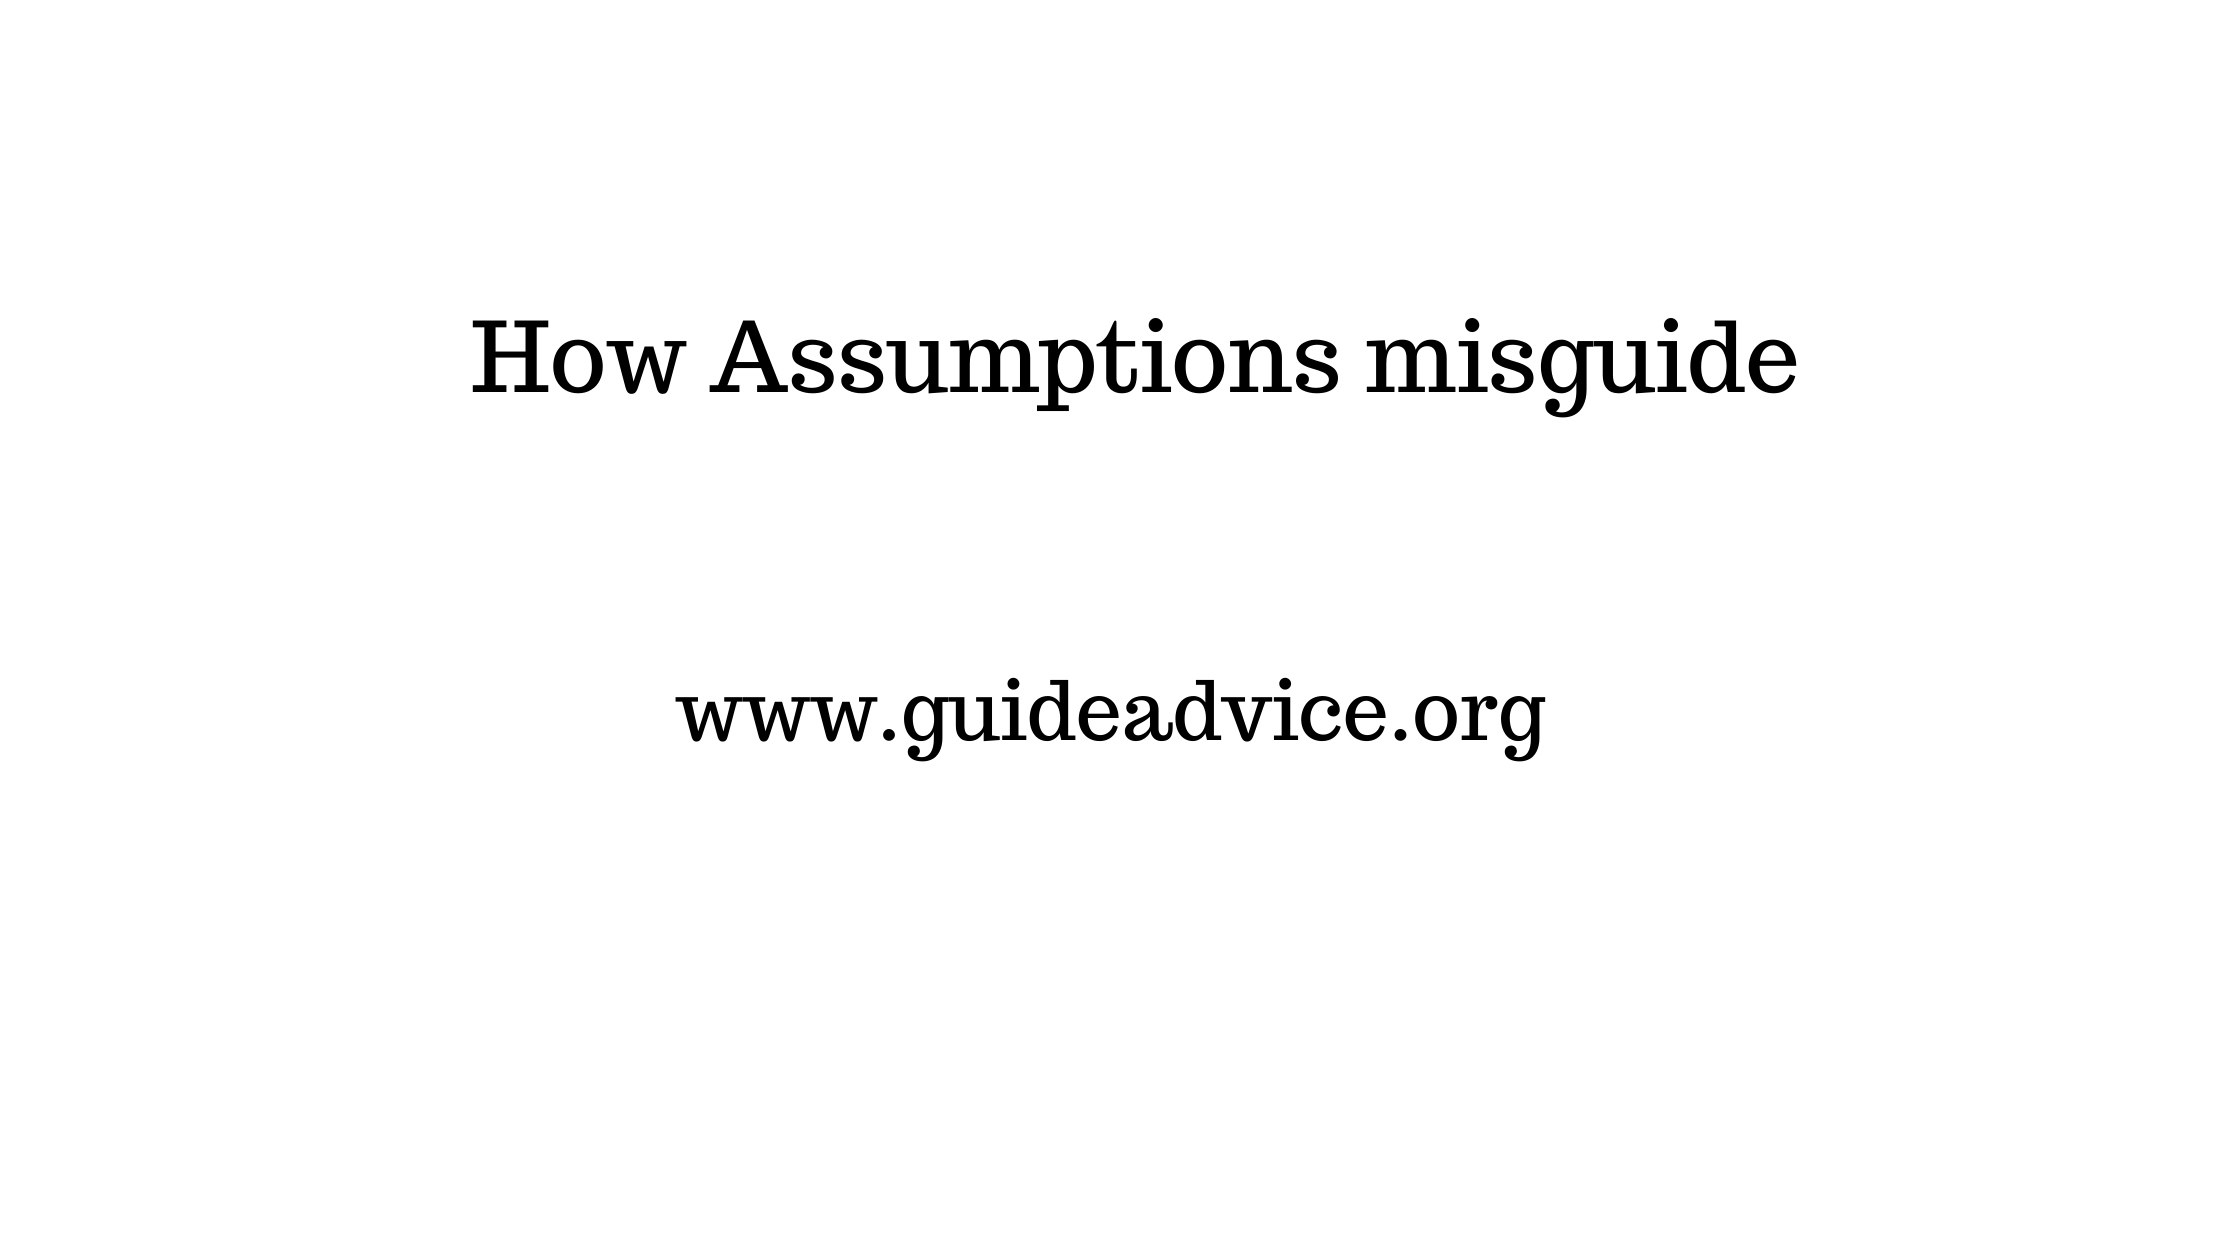 How Assumptions misguide